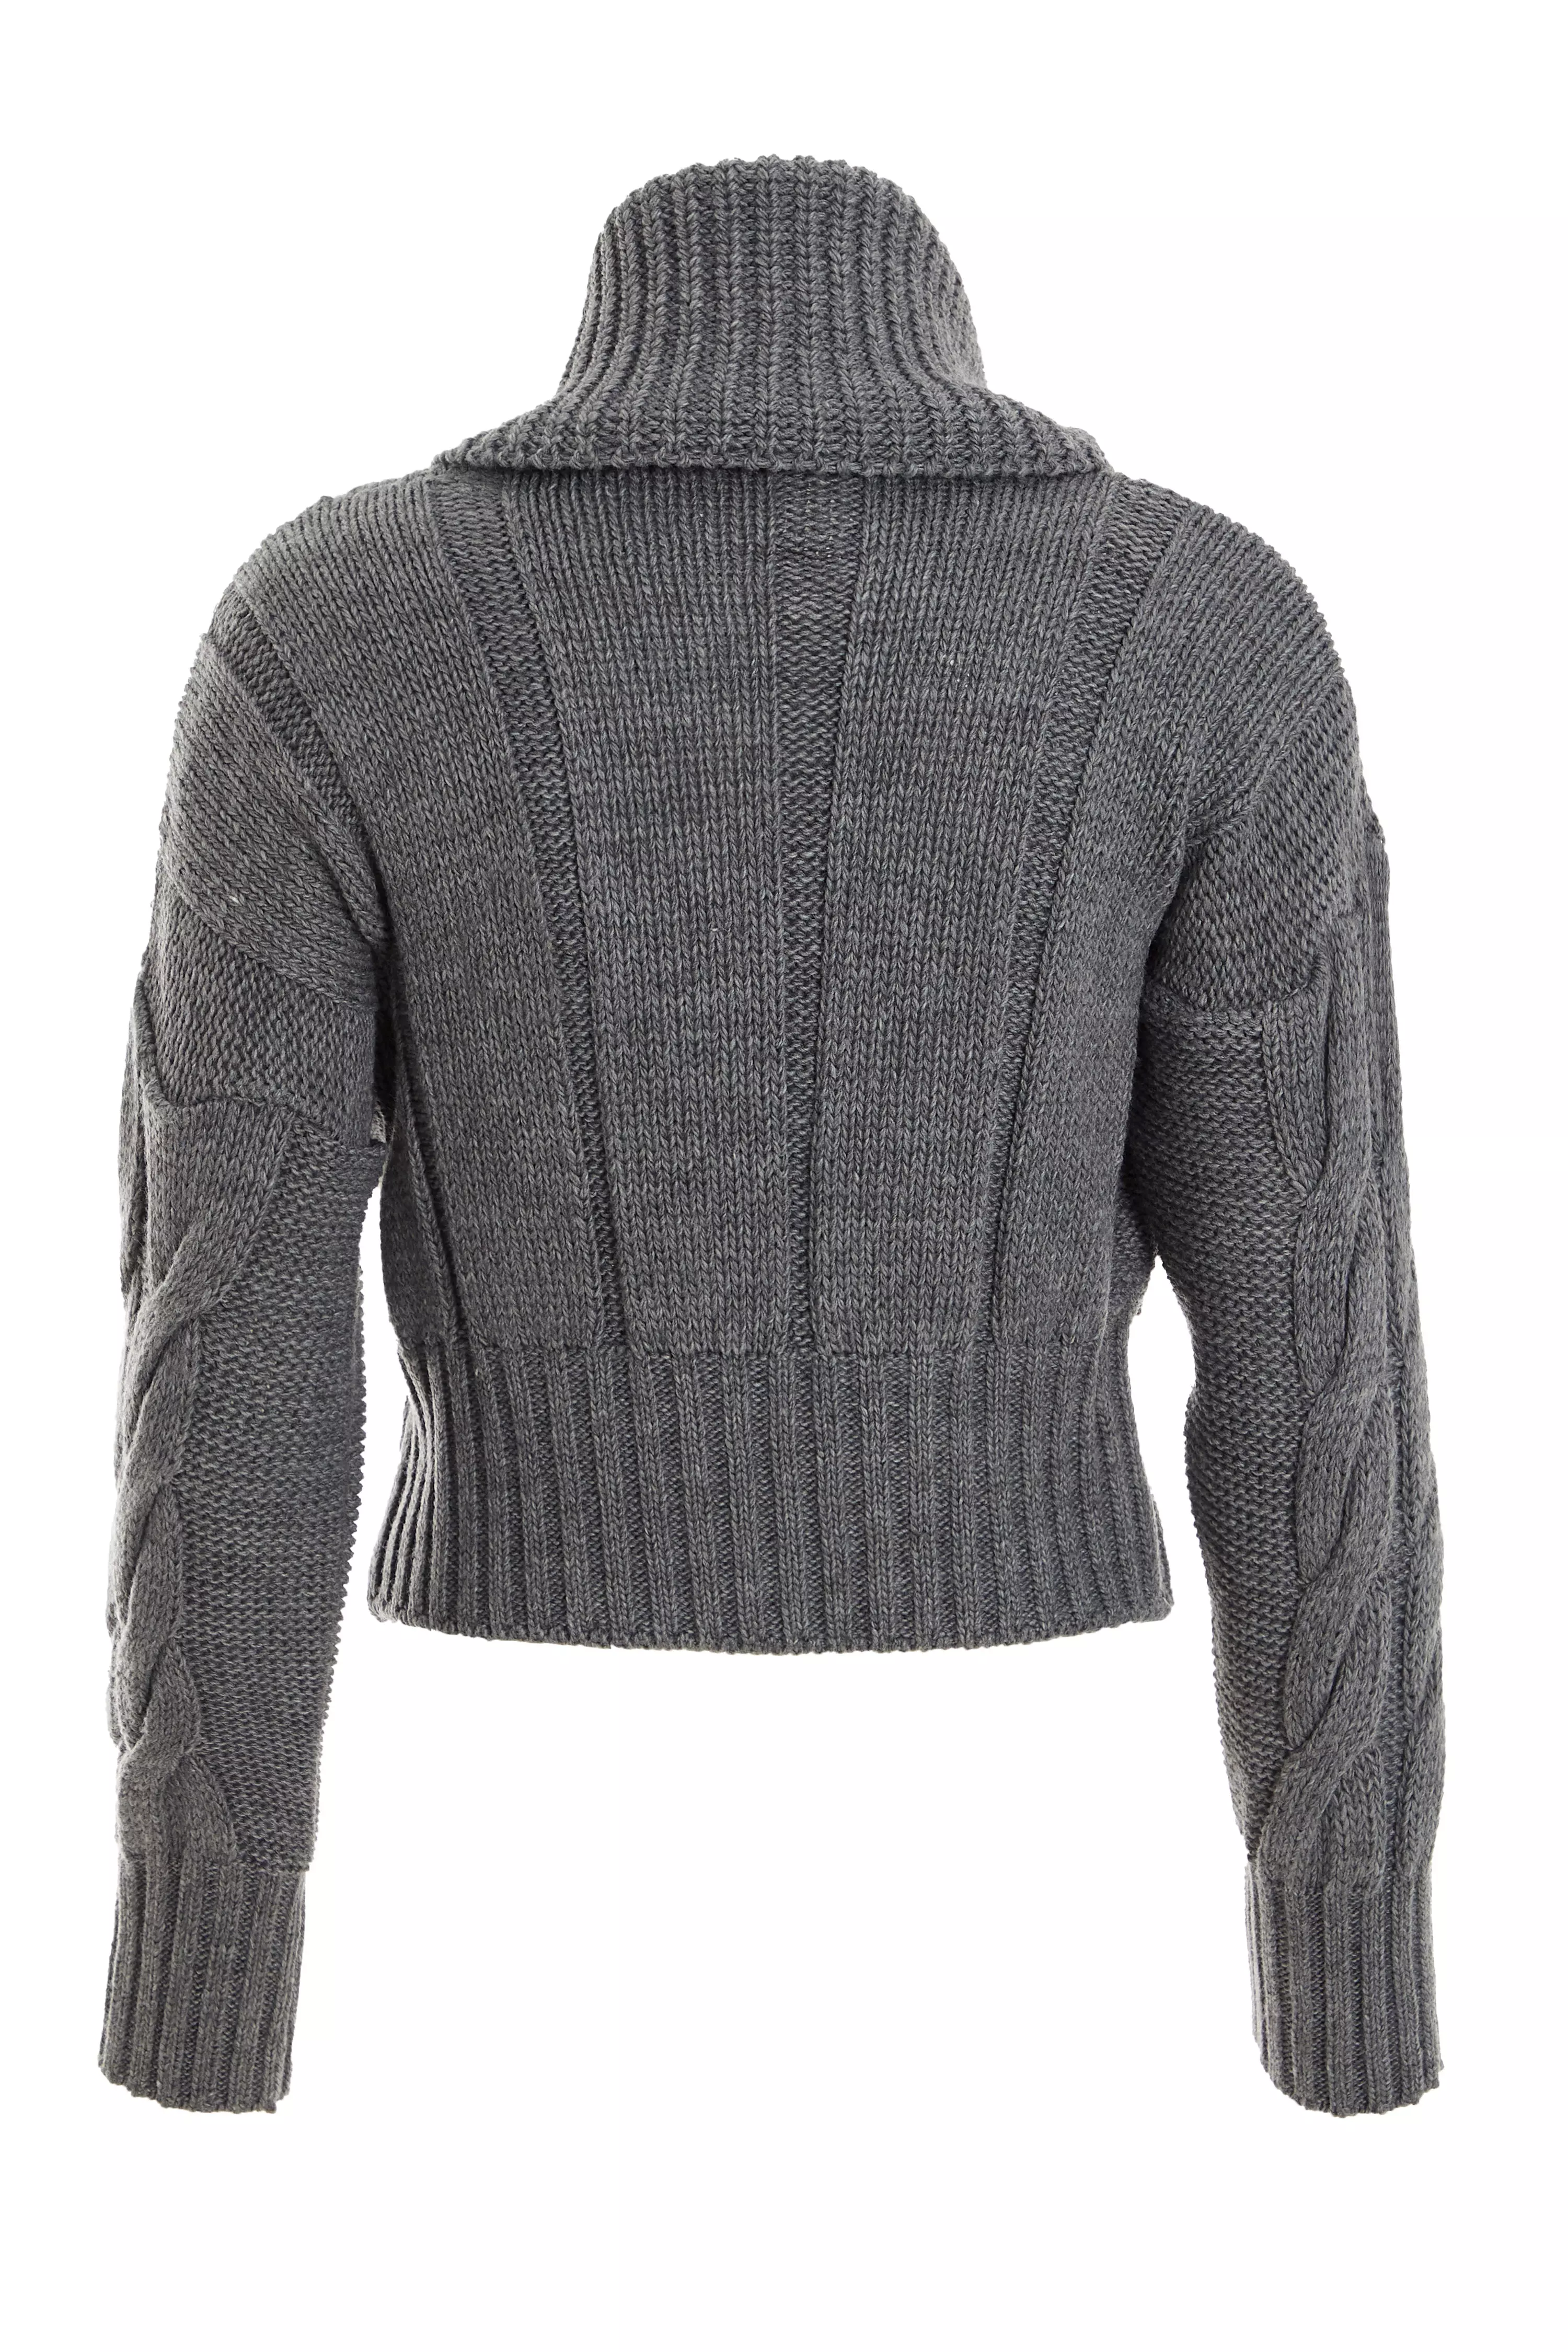 Grey Roll Neck Knitted Cropped Jumper - QUIZ Clothing